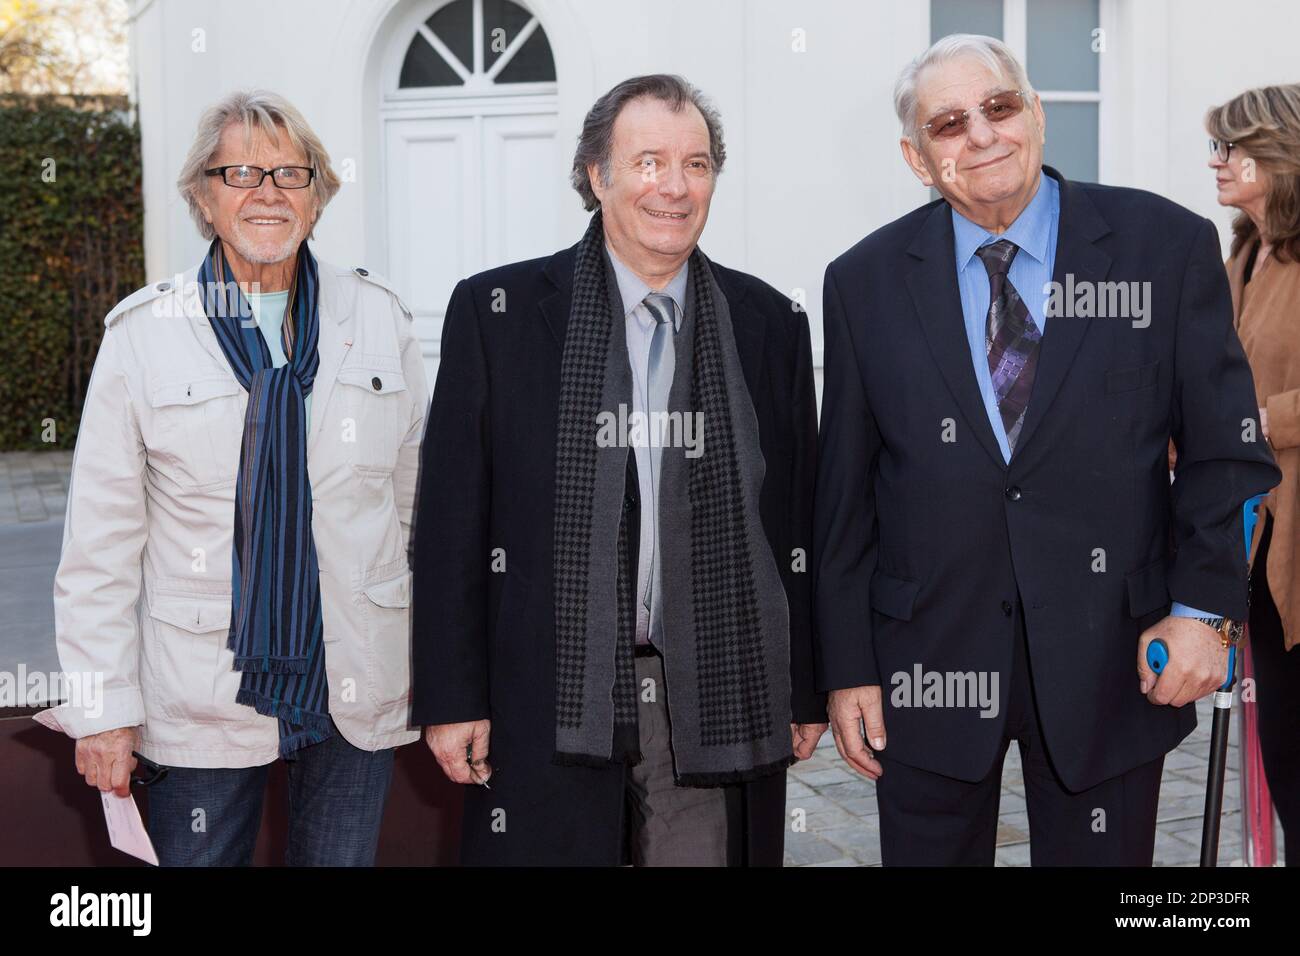 Michel Le Royer, Daniel Russo and Henri Guybet attending the 5th Birthday Party of Museum Paul Belmondo in Boulogne Billancourt, France, on April 13, 2015. Photo by Audrey Poree/ ABACAPRESS.COM Stock Photo